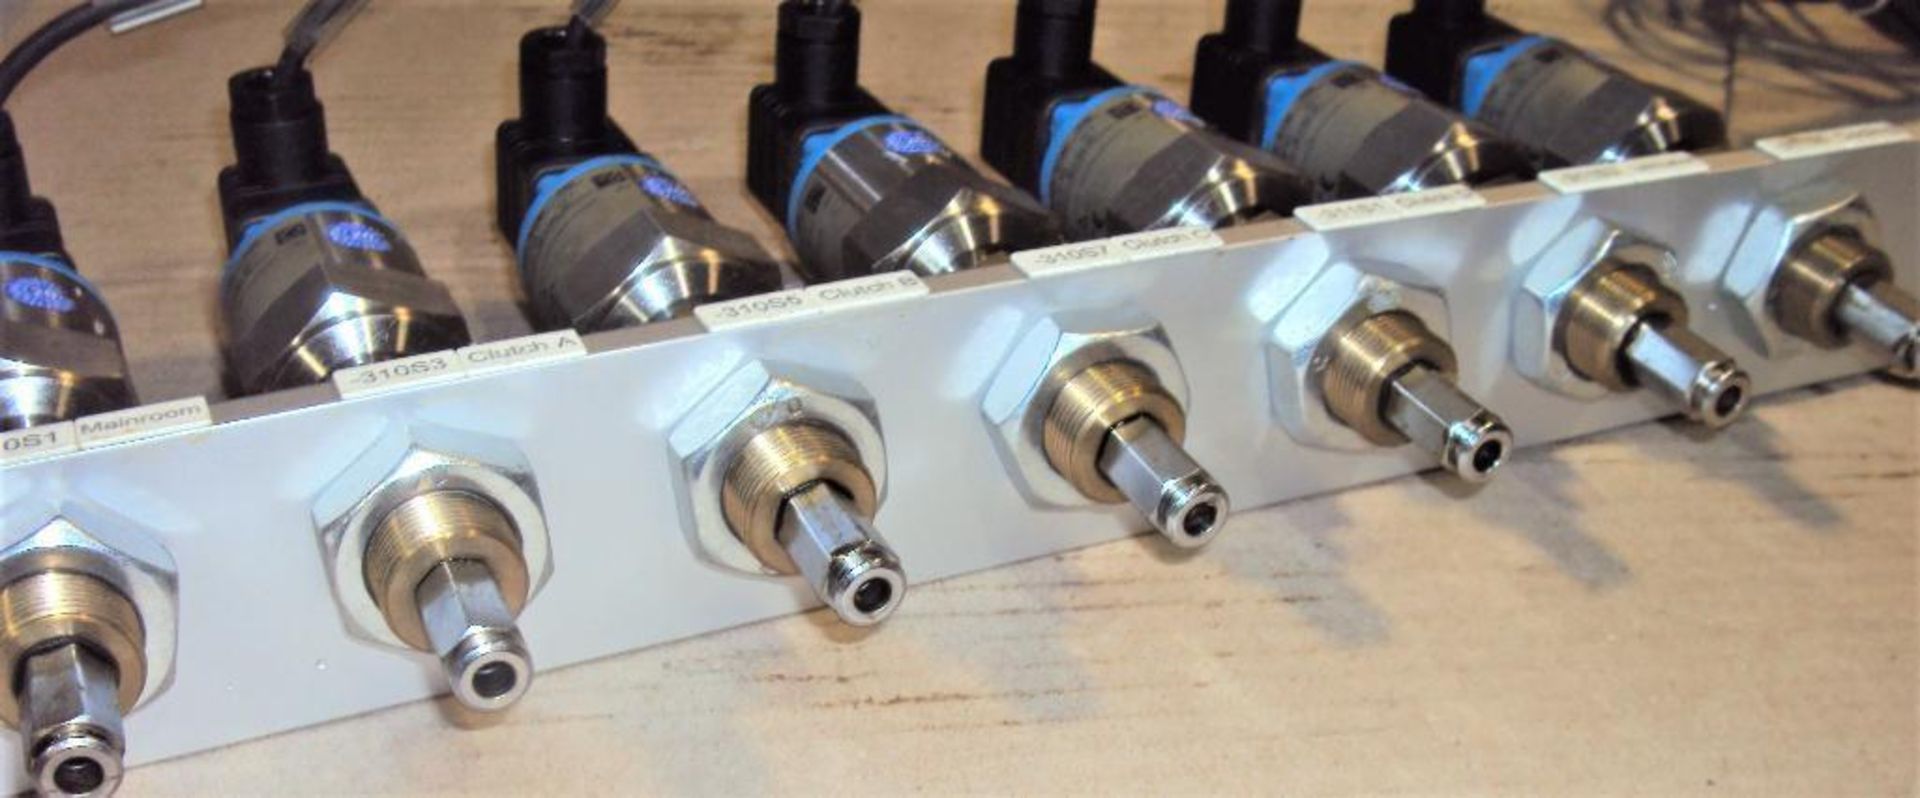 Lot of (7) Endress + Hauser PMC131-A11F1A1Q Pressure Transducers - Image 4 of 4